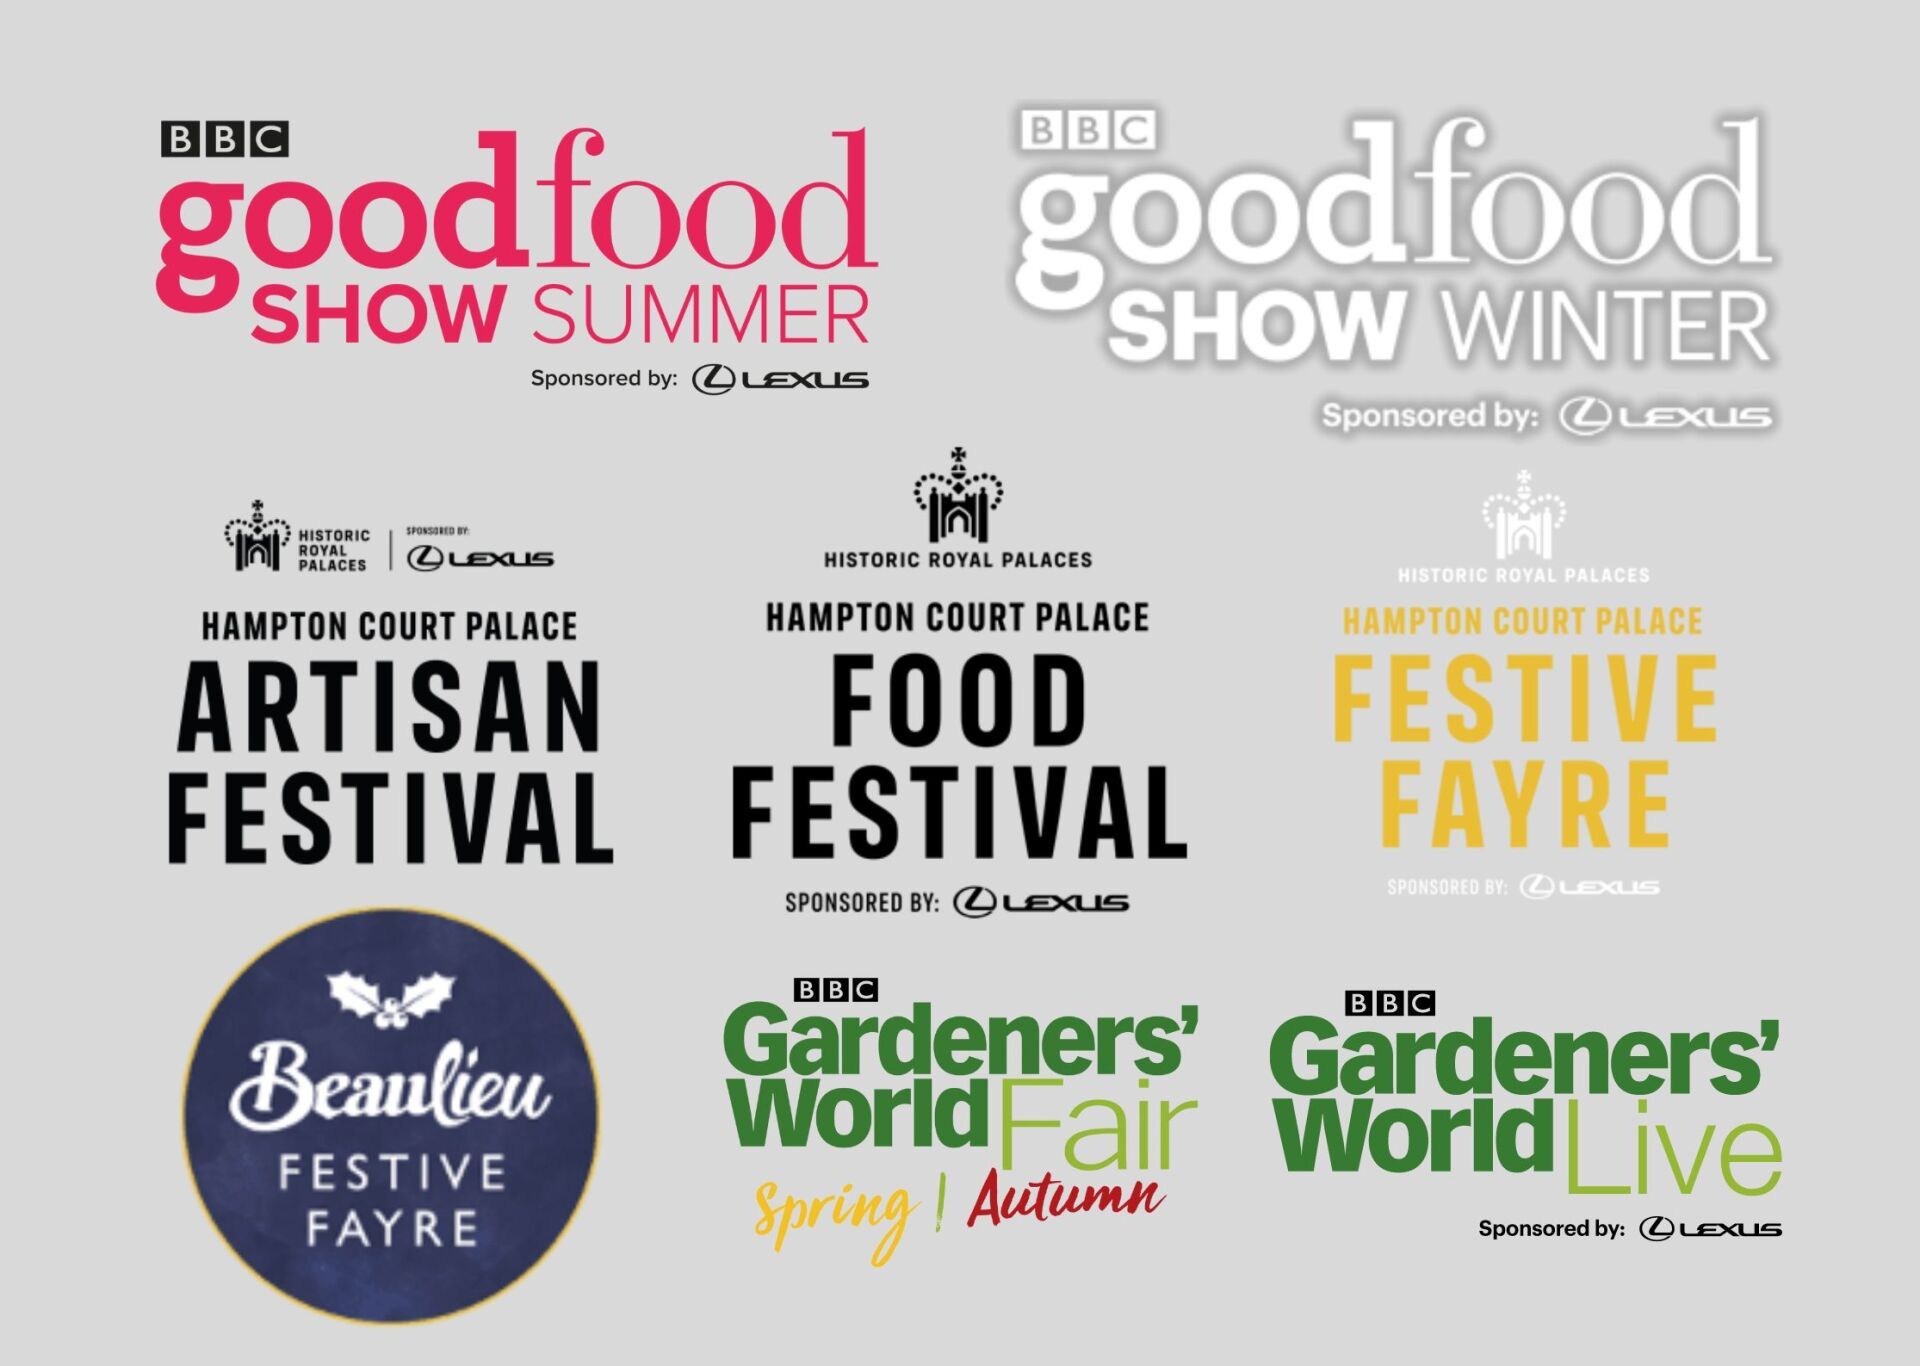 Fabulous Food Finds at the BBC Good Food Show